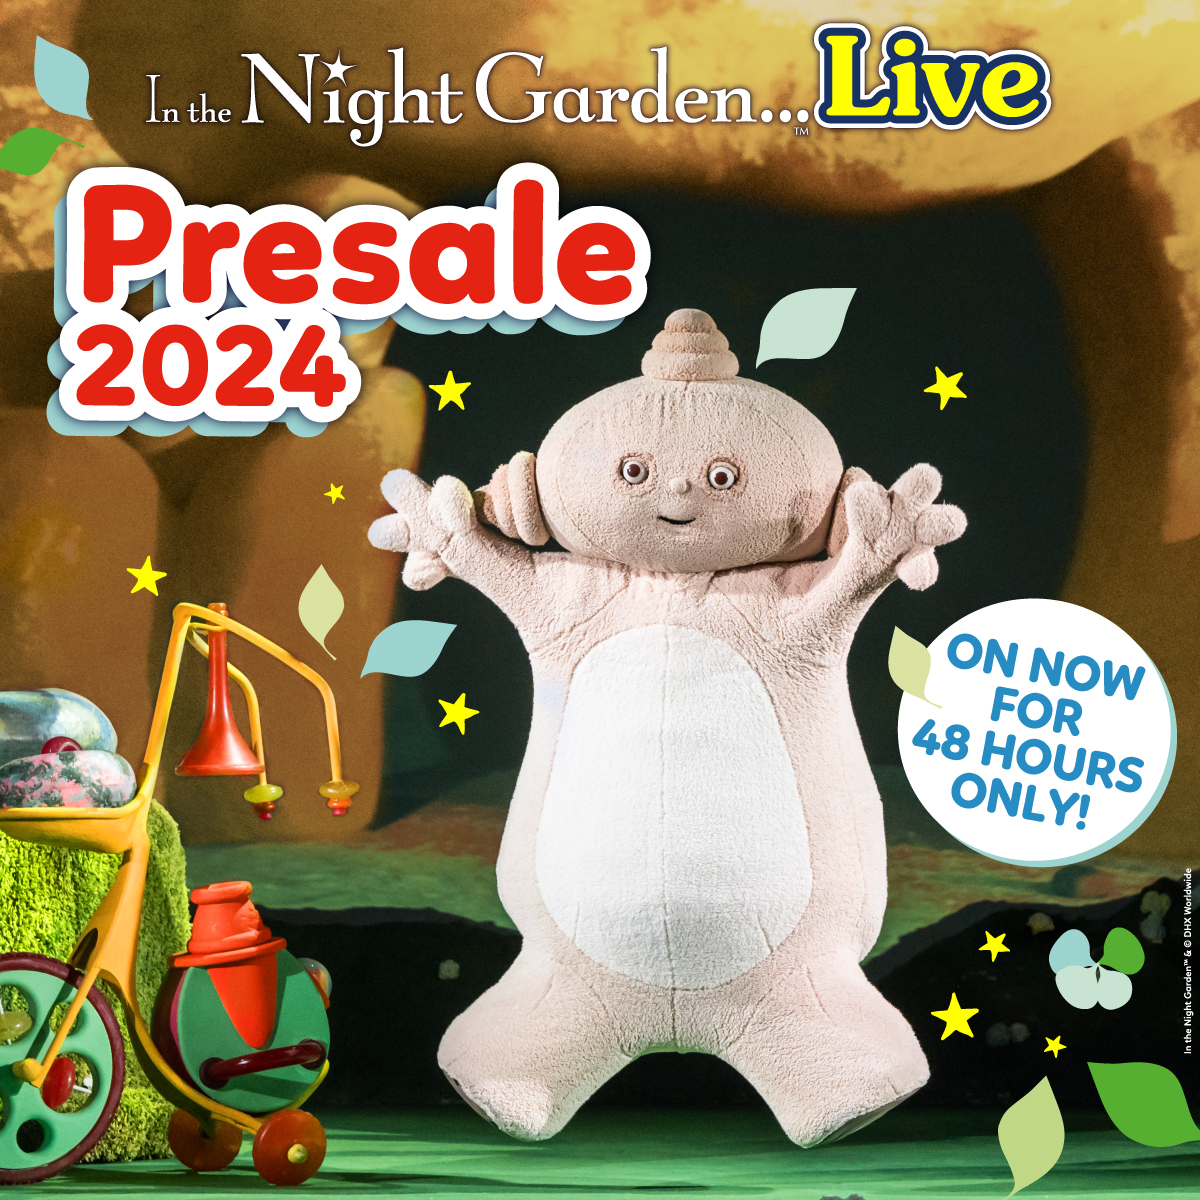 📣 Our exclusive presale 2024 starts today for 48 hours only! If you've registered for presale please check your emails/texts with links & unique codes to book your tickets today. 🎟️ Tickets general on sale - 9am Fri 2 Feb See our full tour list here ➡️ nightgardenlive.com/#venues